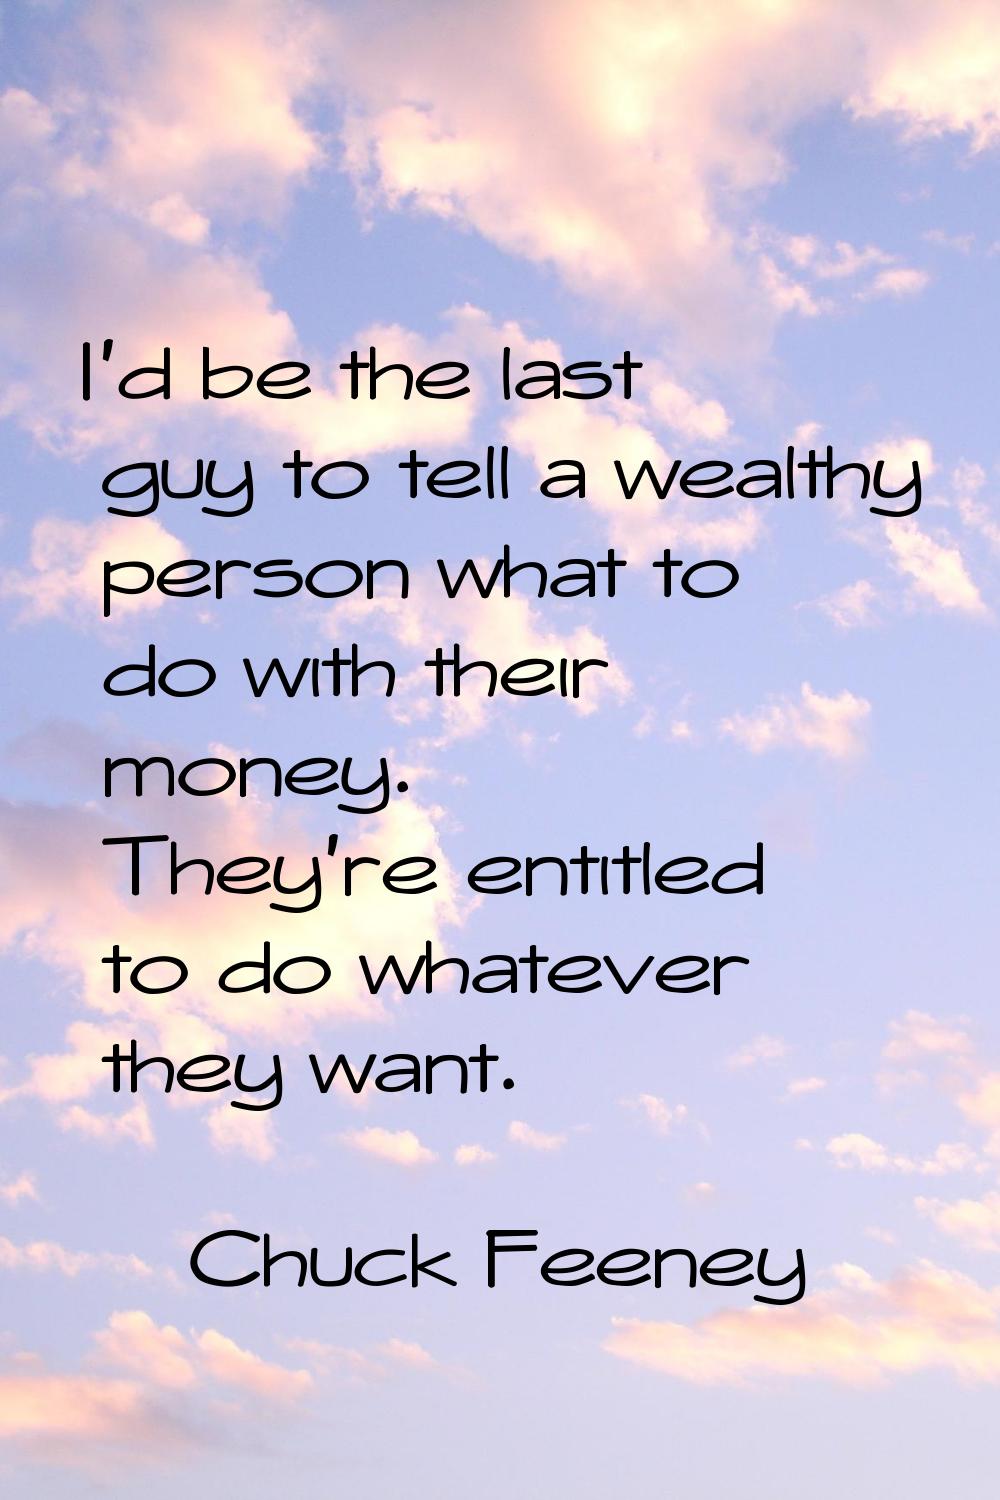 I'd be the last guy to tell a wealthy person what to do with their money. They're entitled to do wh